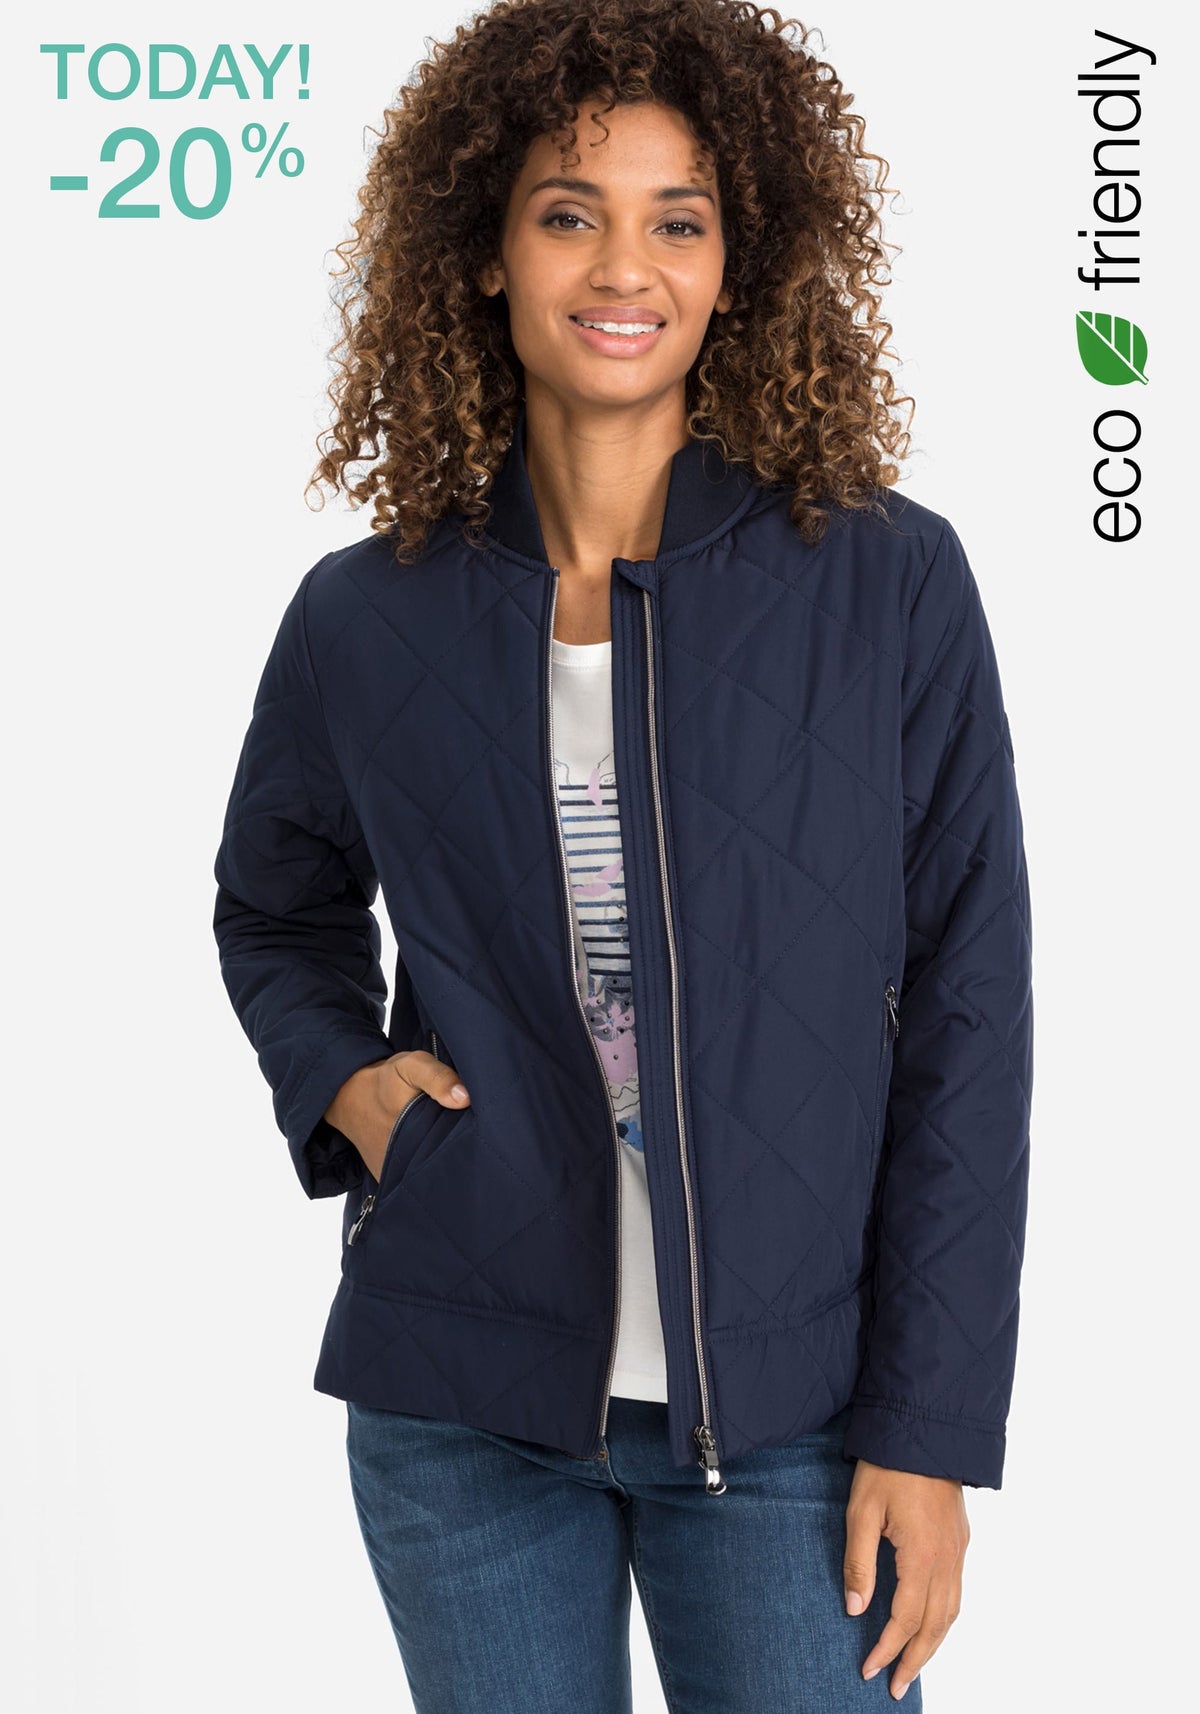 Quilted Bomber Jacket containing REPREVE®